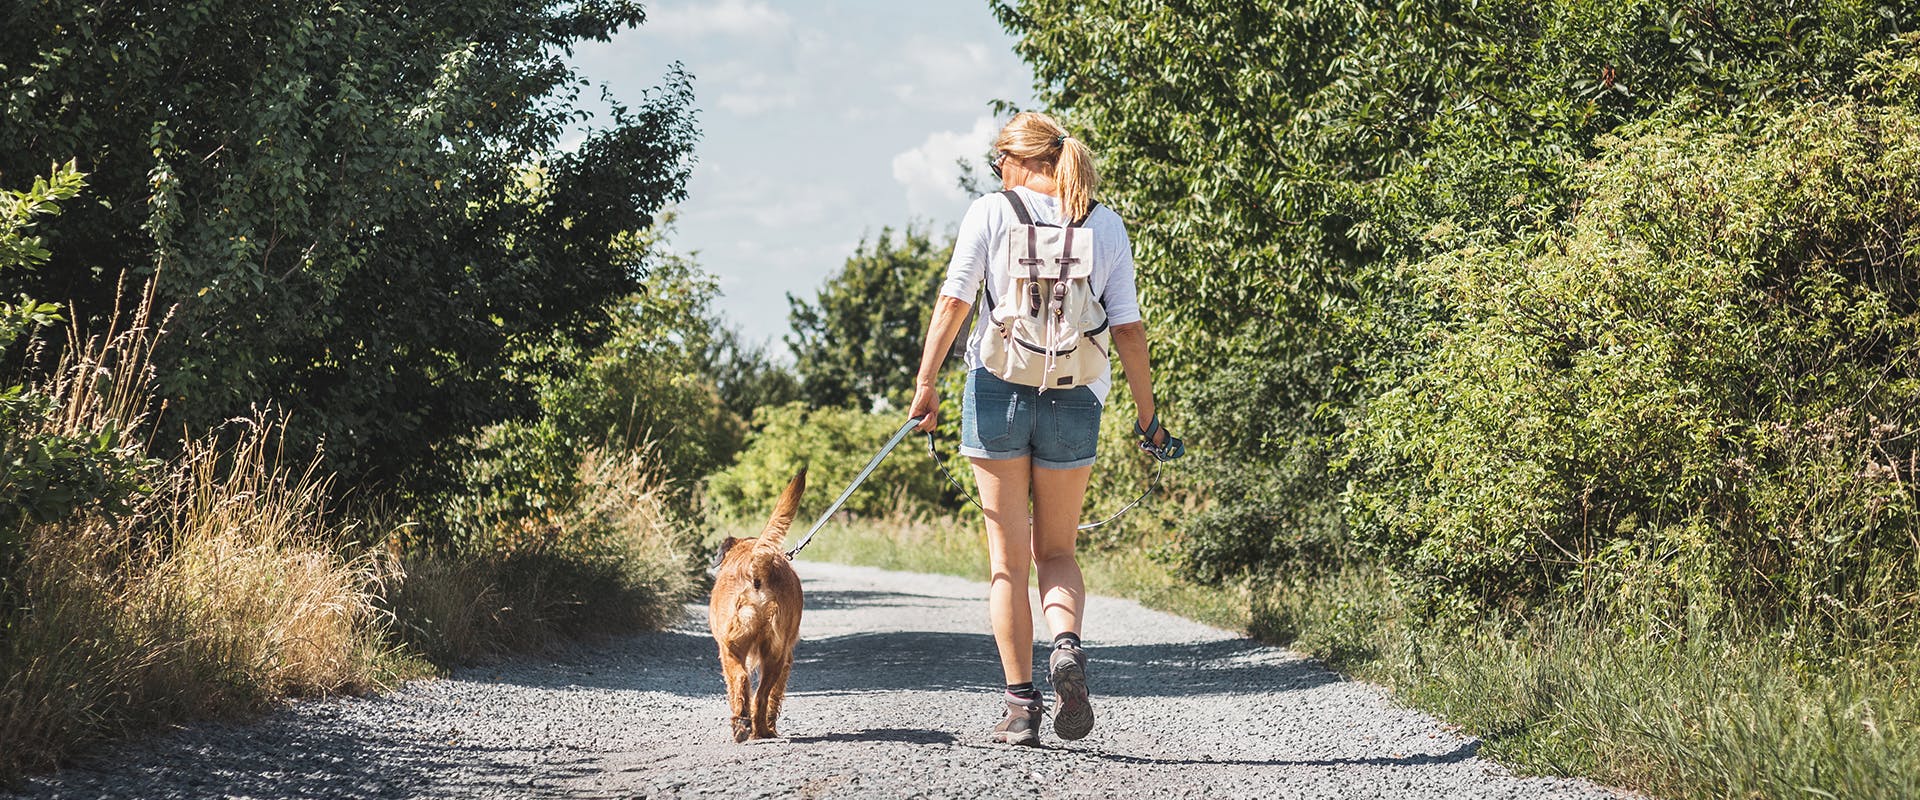 A woman walking her dog in the countryside